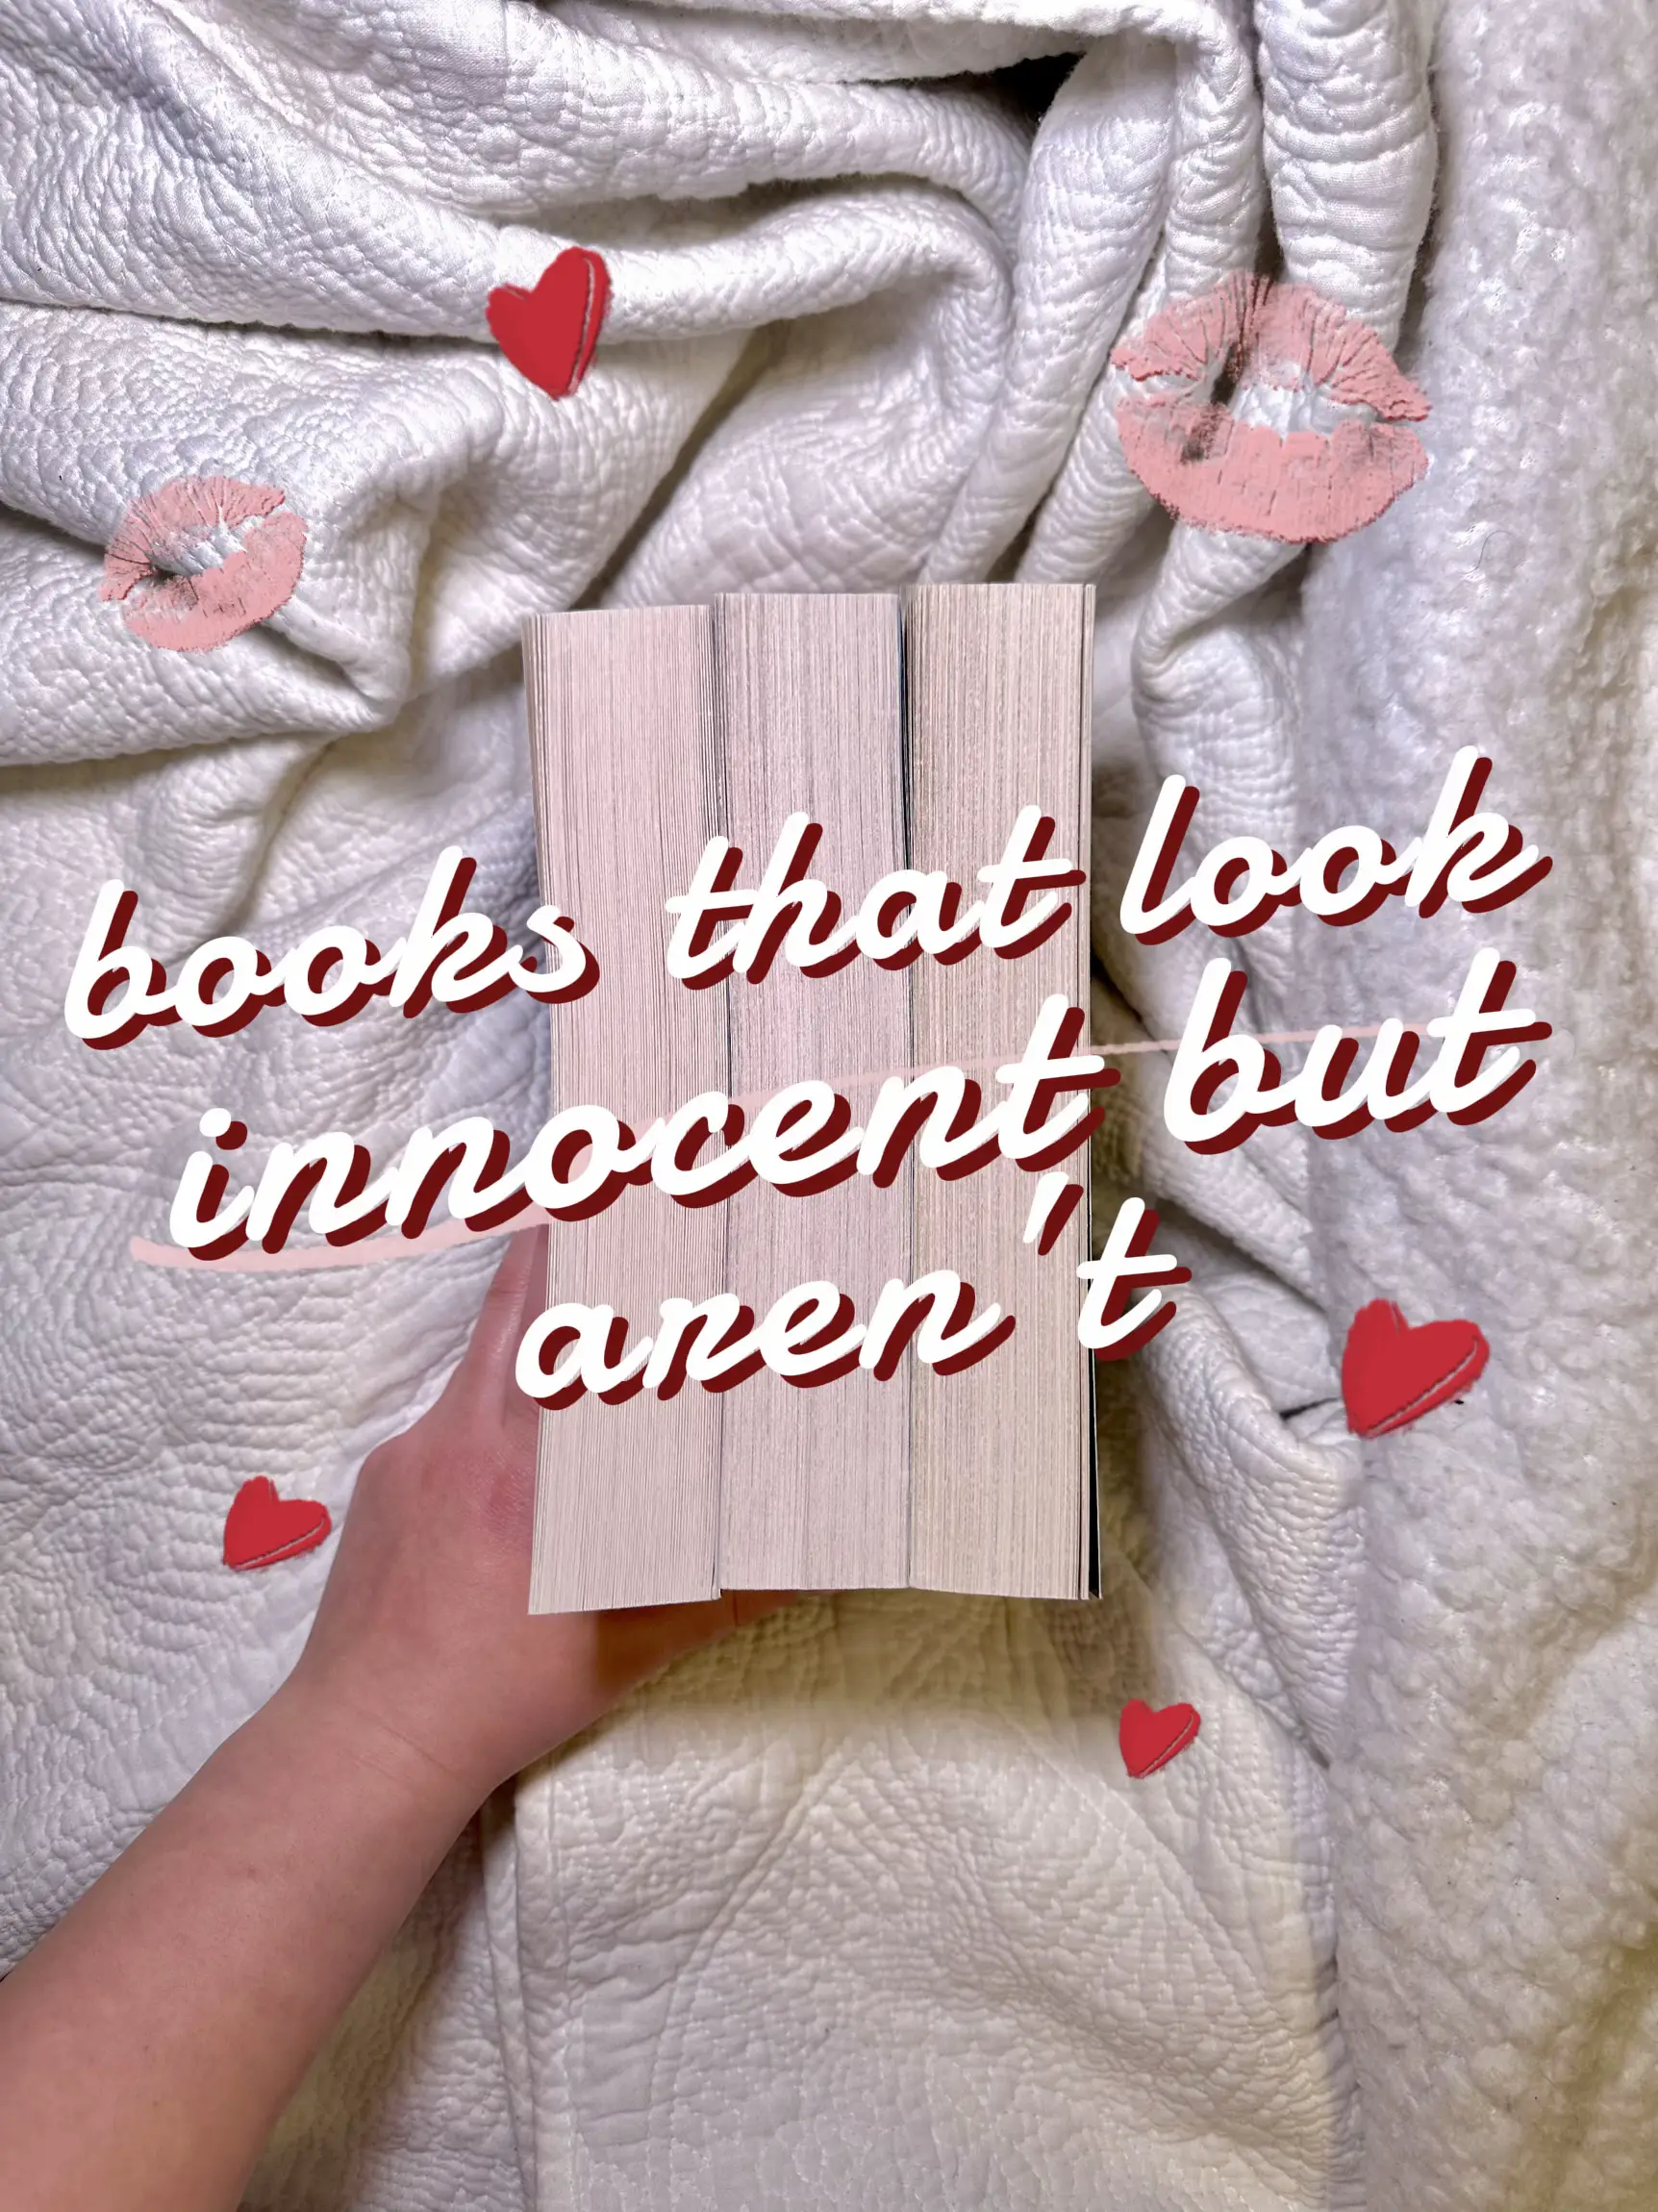 Books that look innocent but ARENT 🌶️ 's images